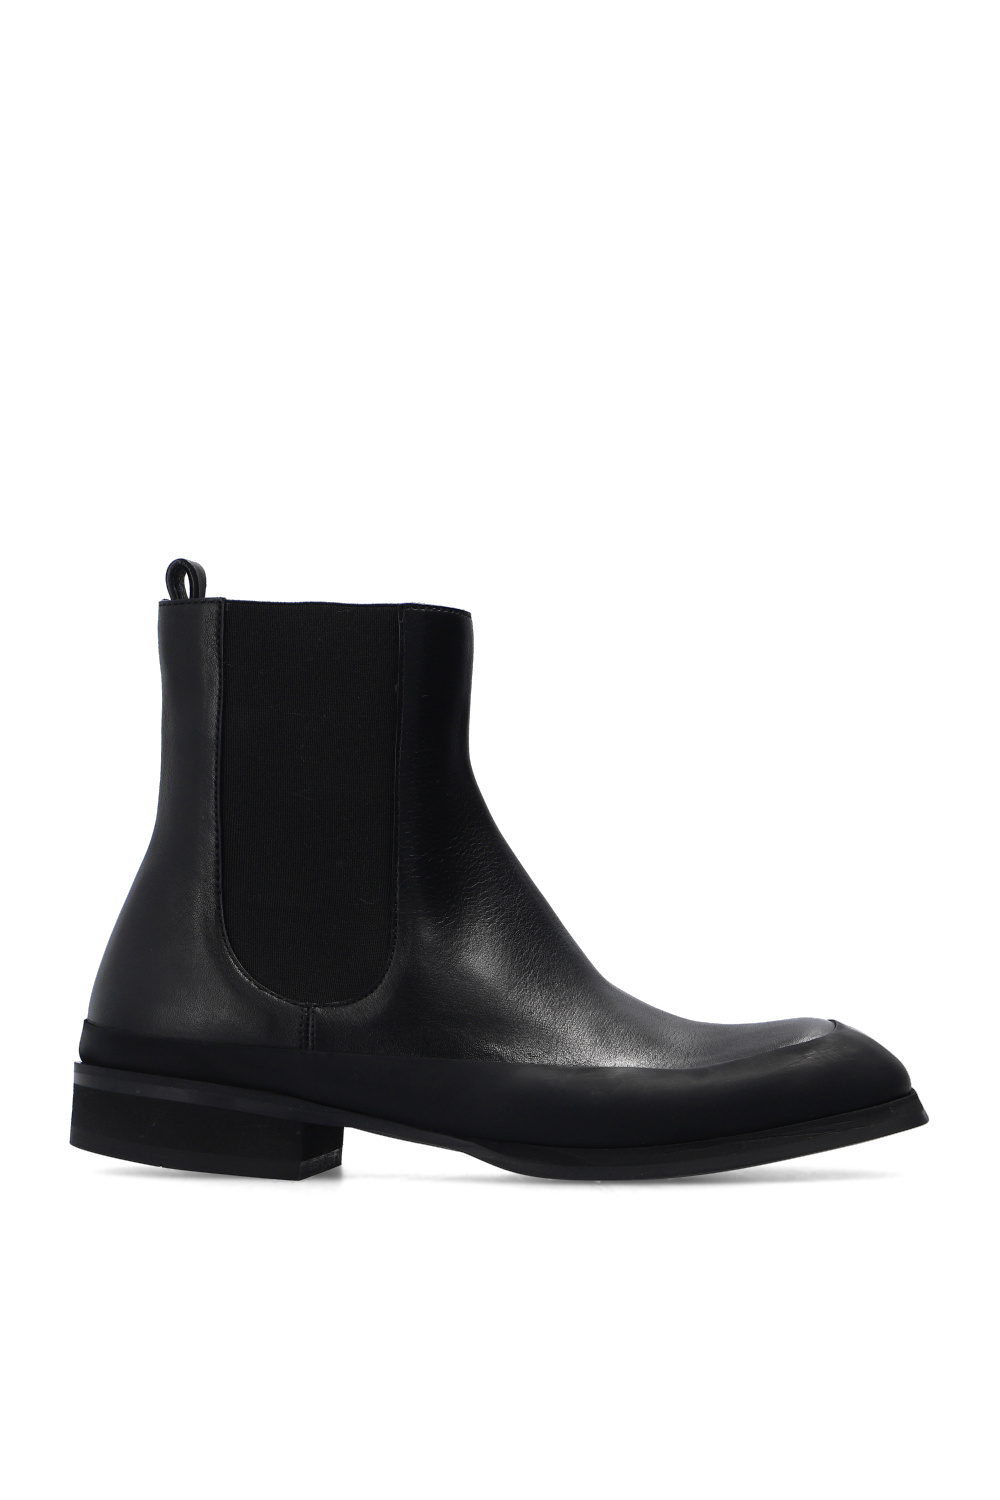 The Row ‘Garden Boot’ leather ankle boots